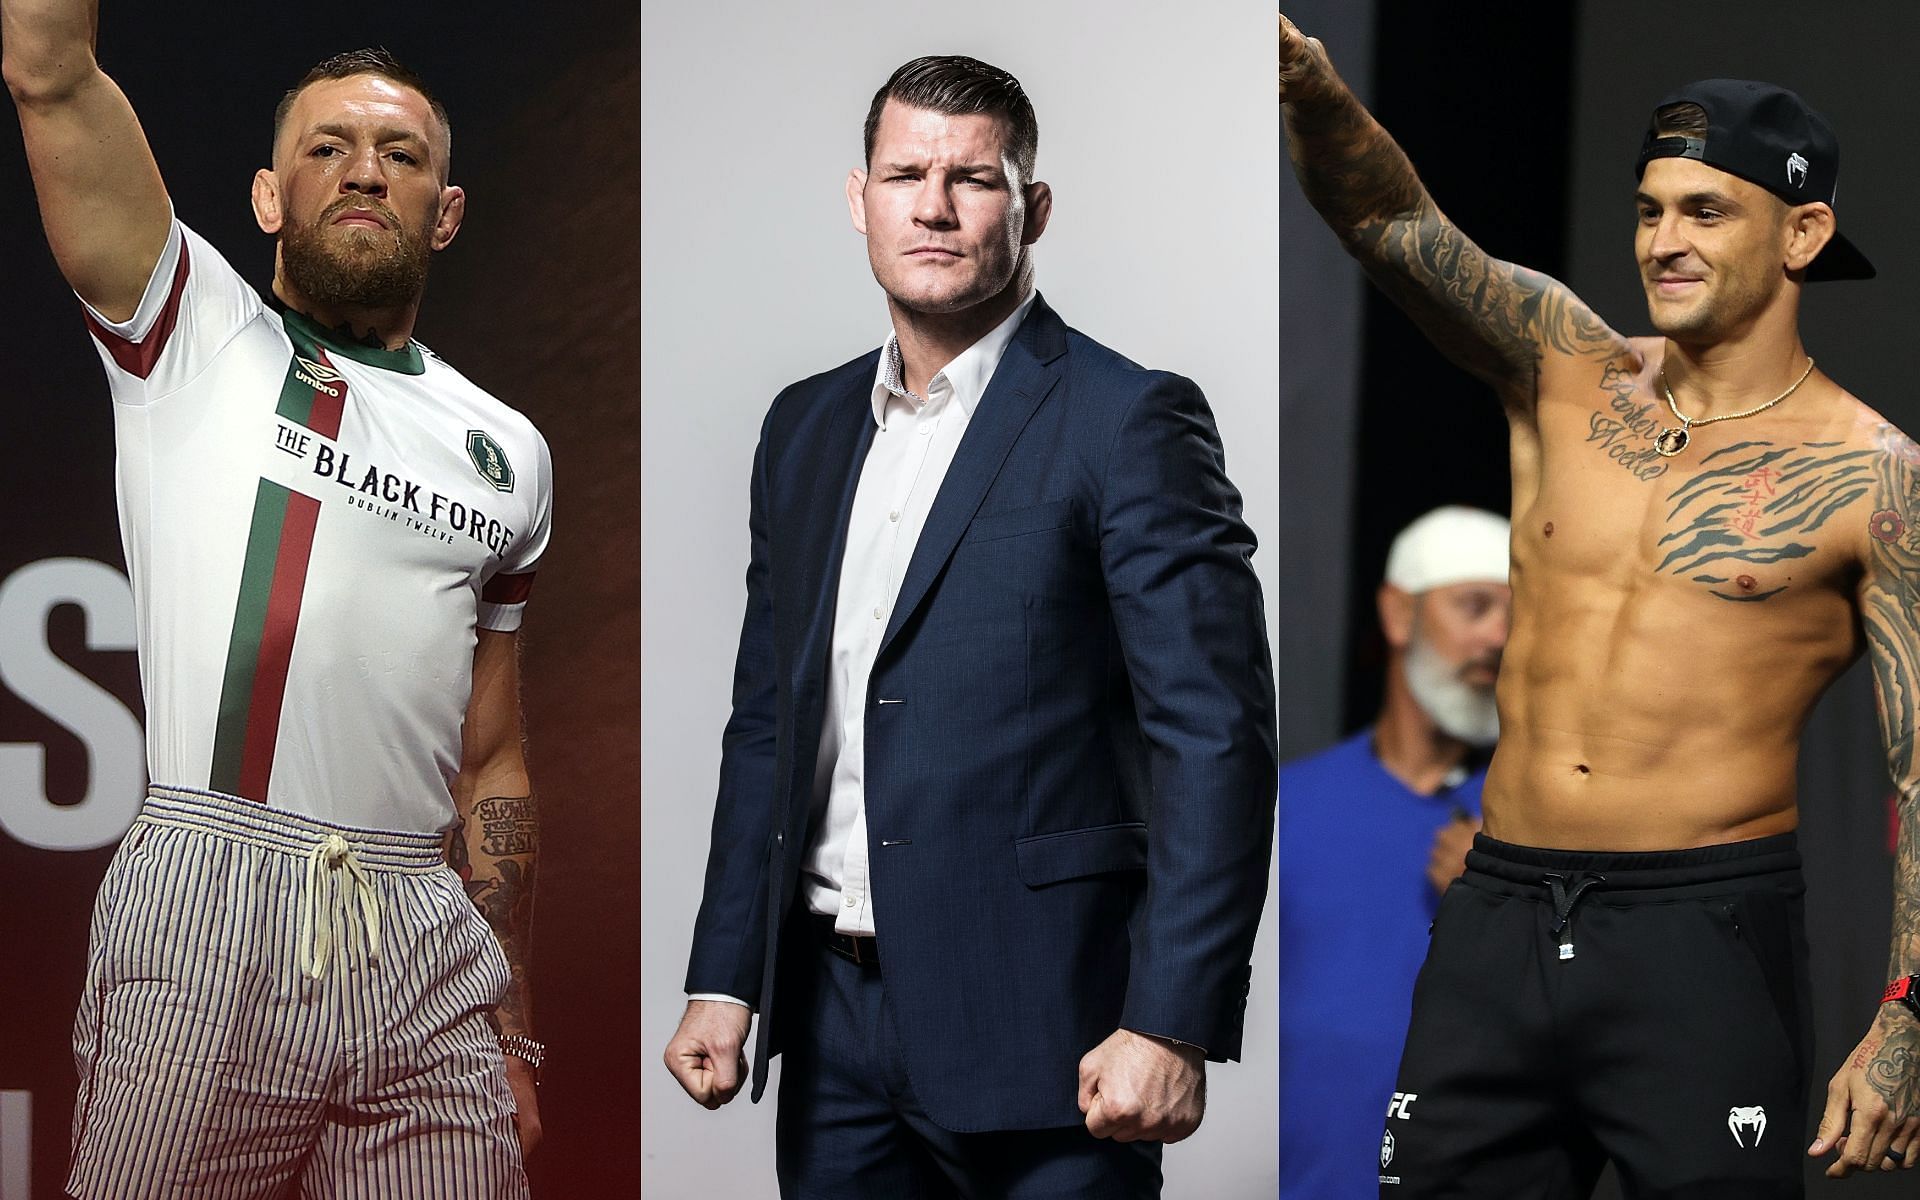 Conor McGregor (left), Michael Bisping (centre) amd Dustin Poirier (right) [Image Courtesy: Getty Images]